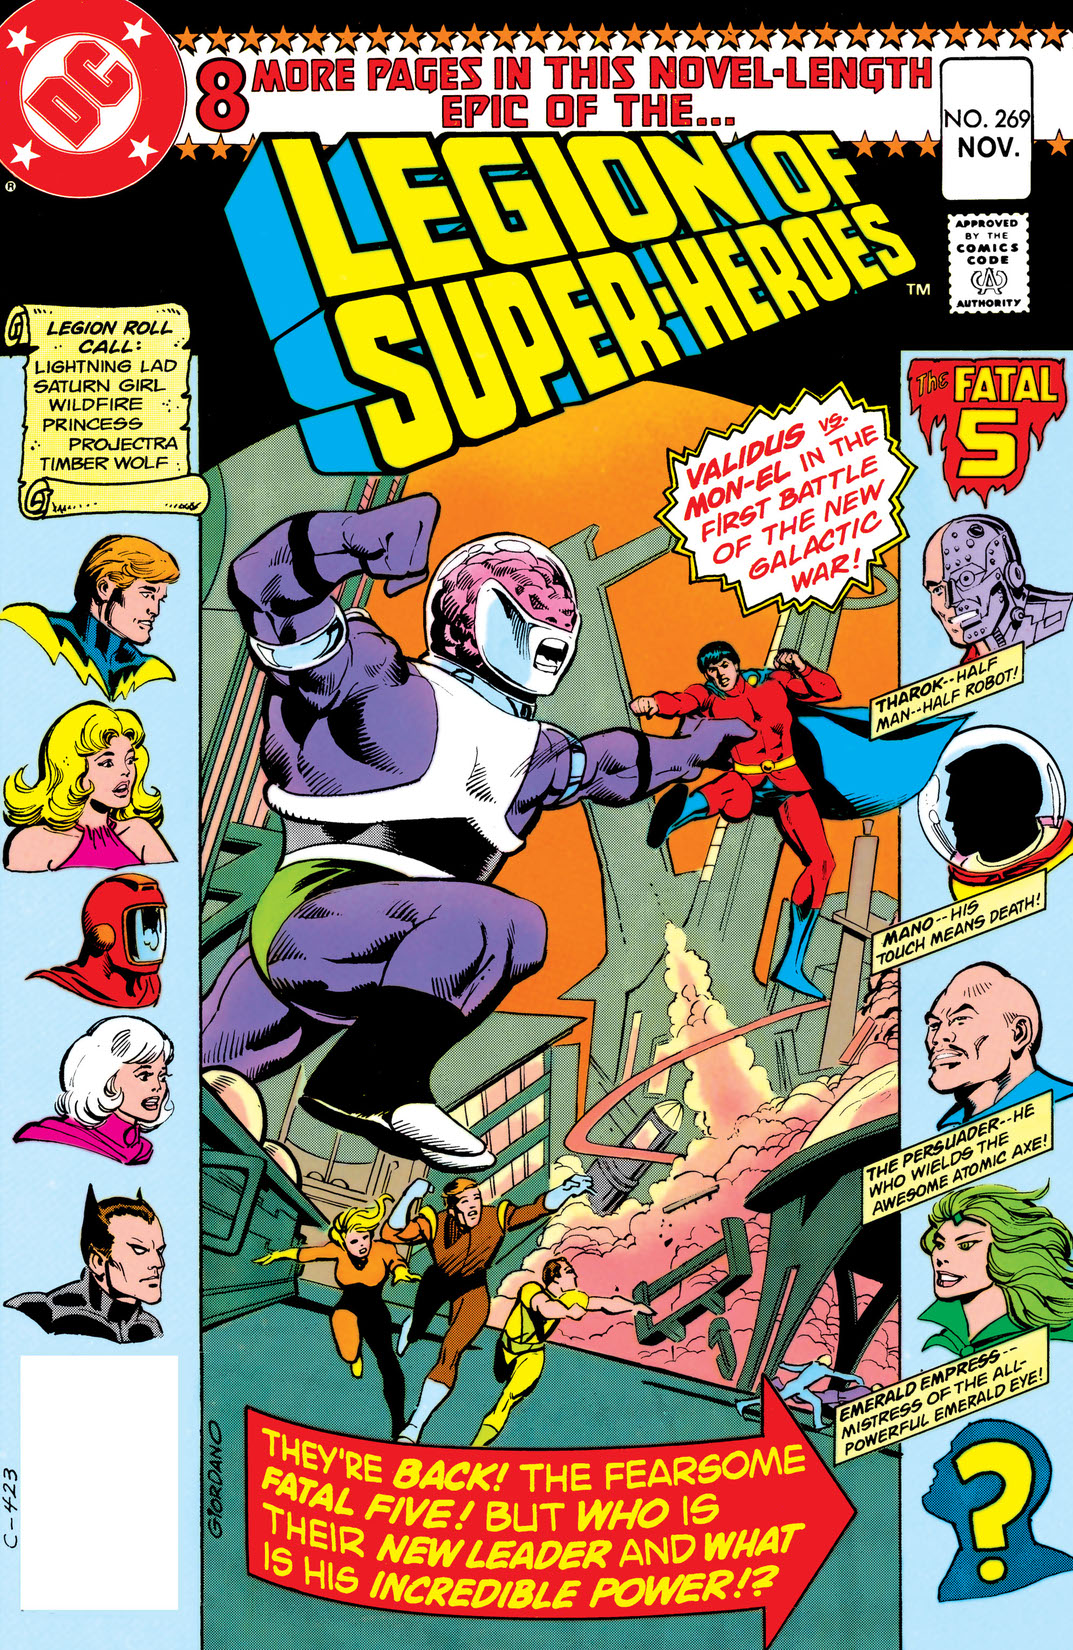 The Legion of Super-Heroes (1980-) #269 preview images